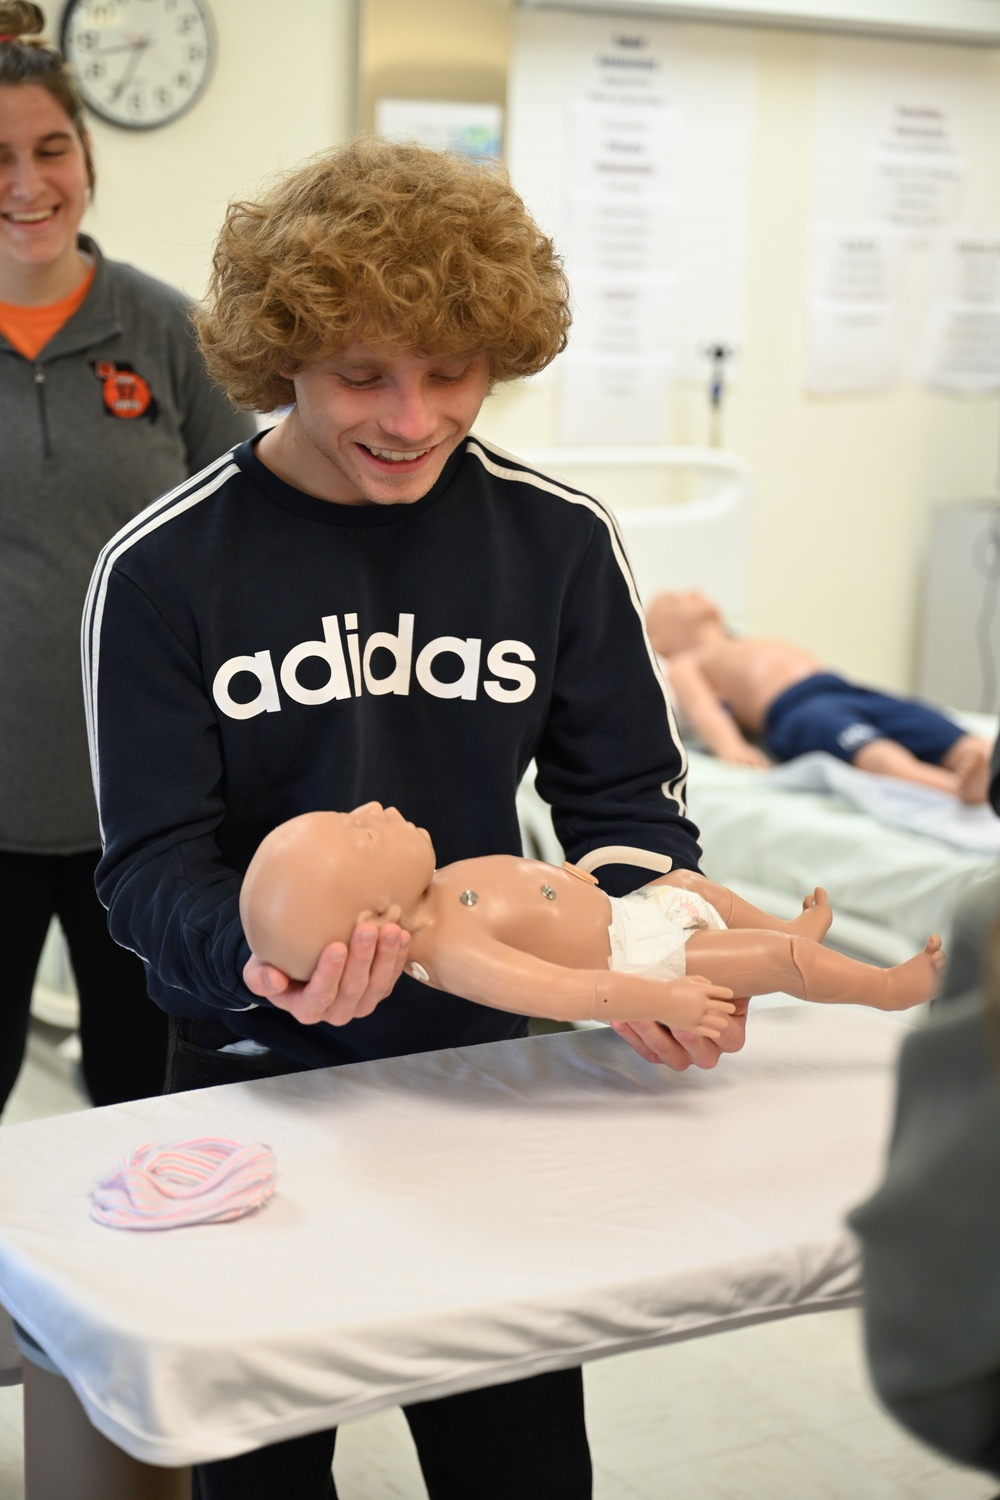 WAYMED Students Get Hands-On Skills at GLWACH